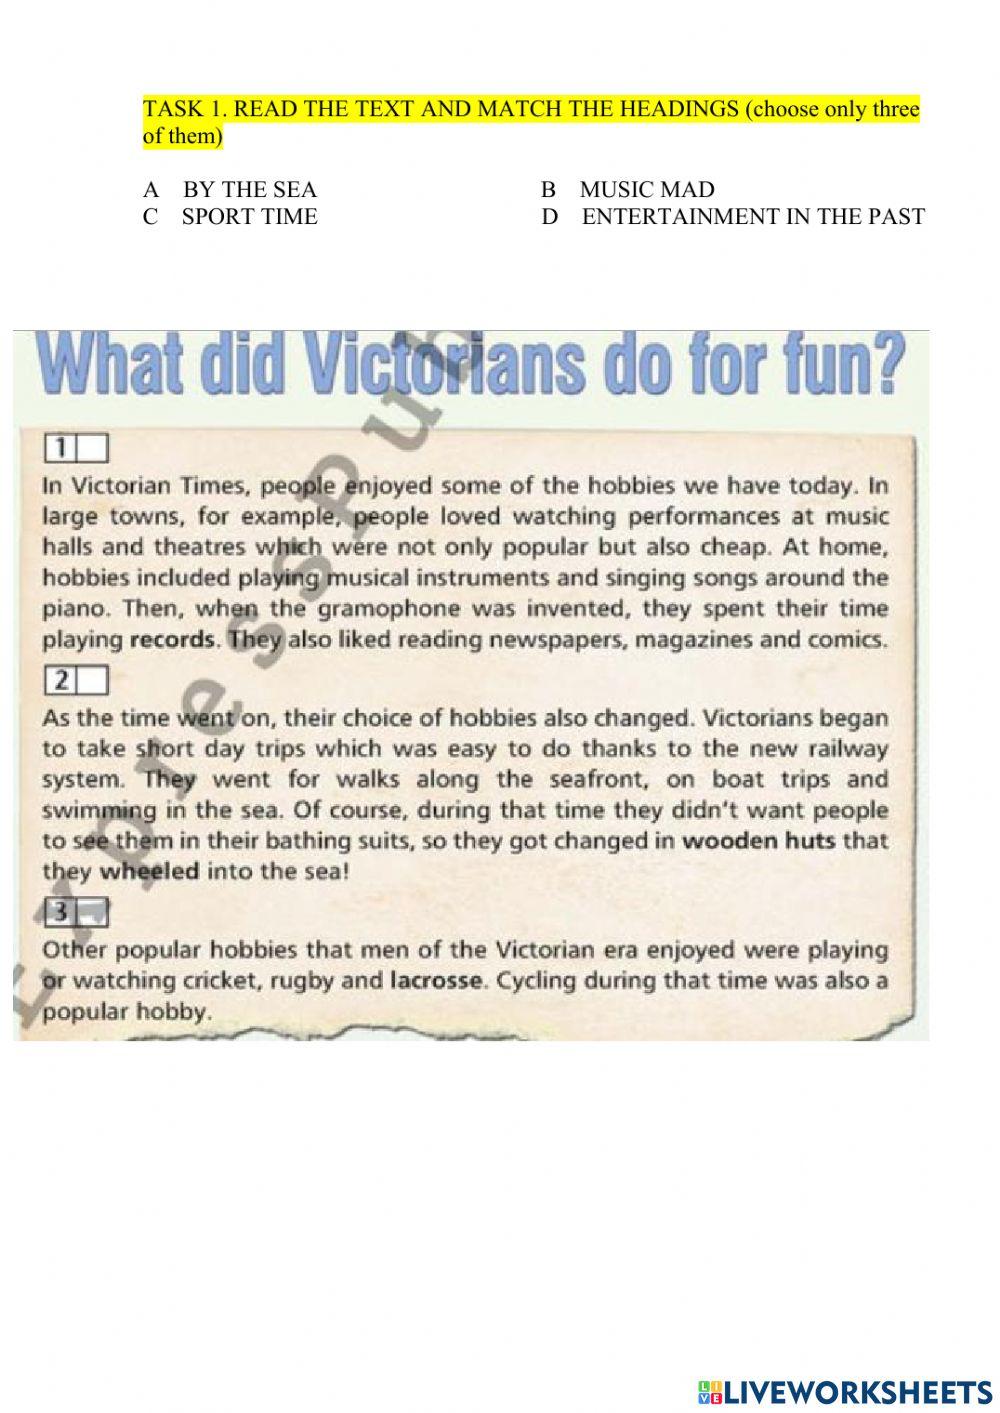 Clil. what did victorians do for fun?